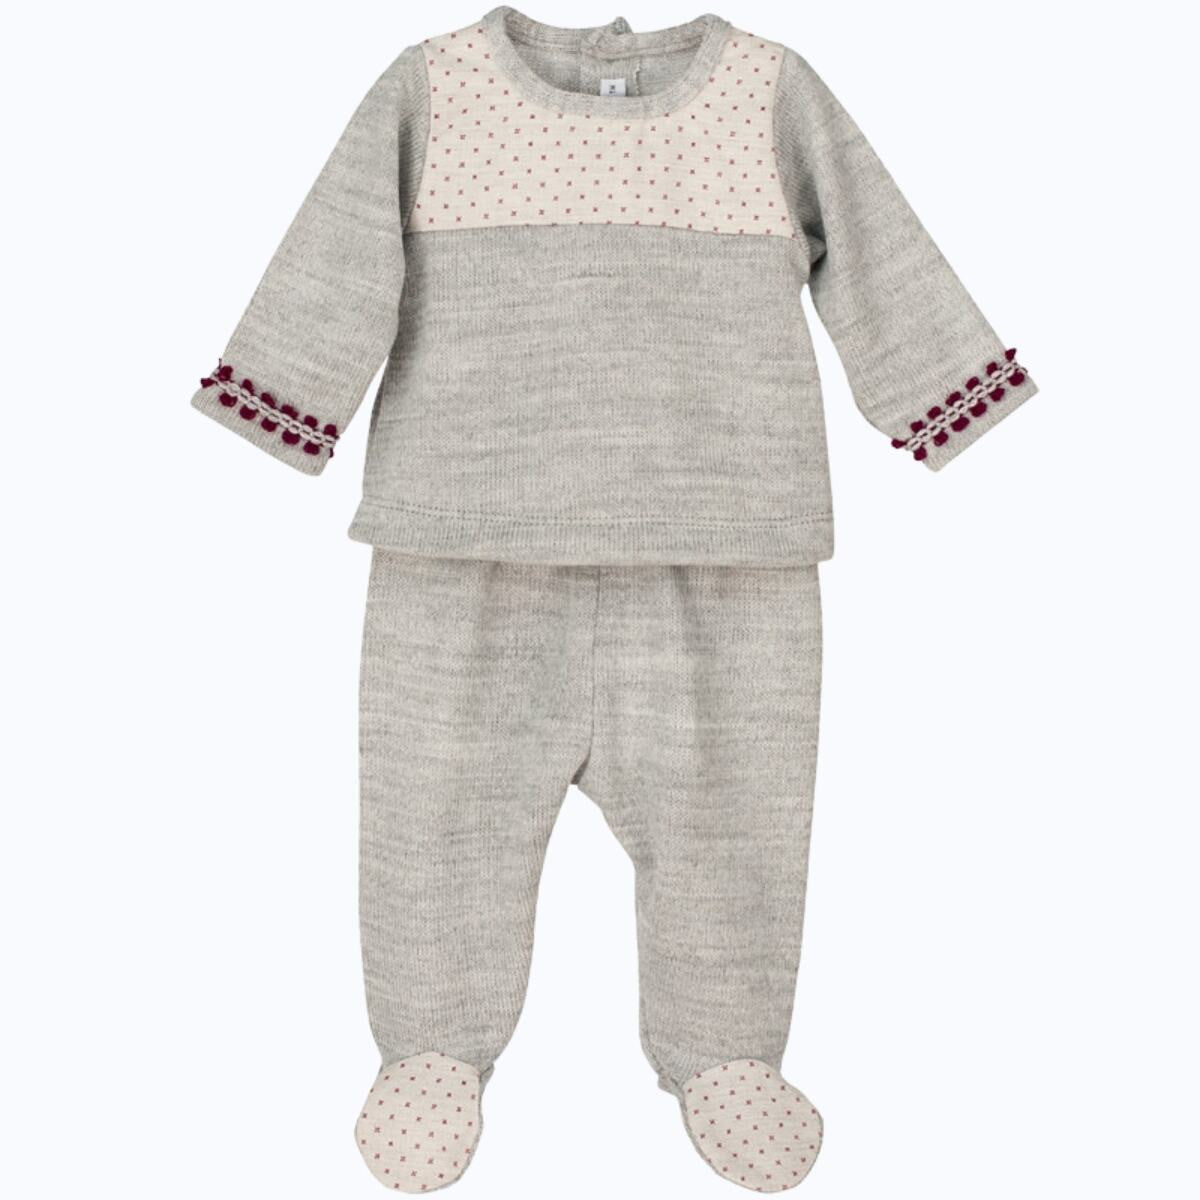 Caleb grey knitted jumper and trouser set